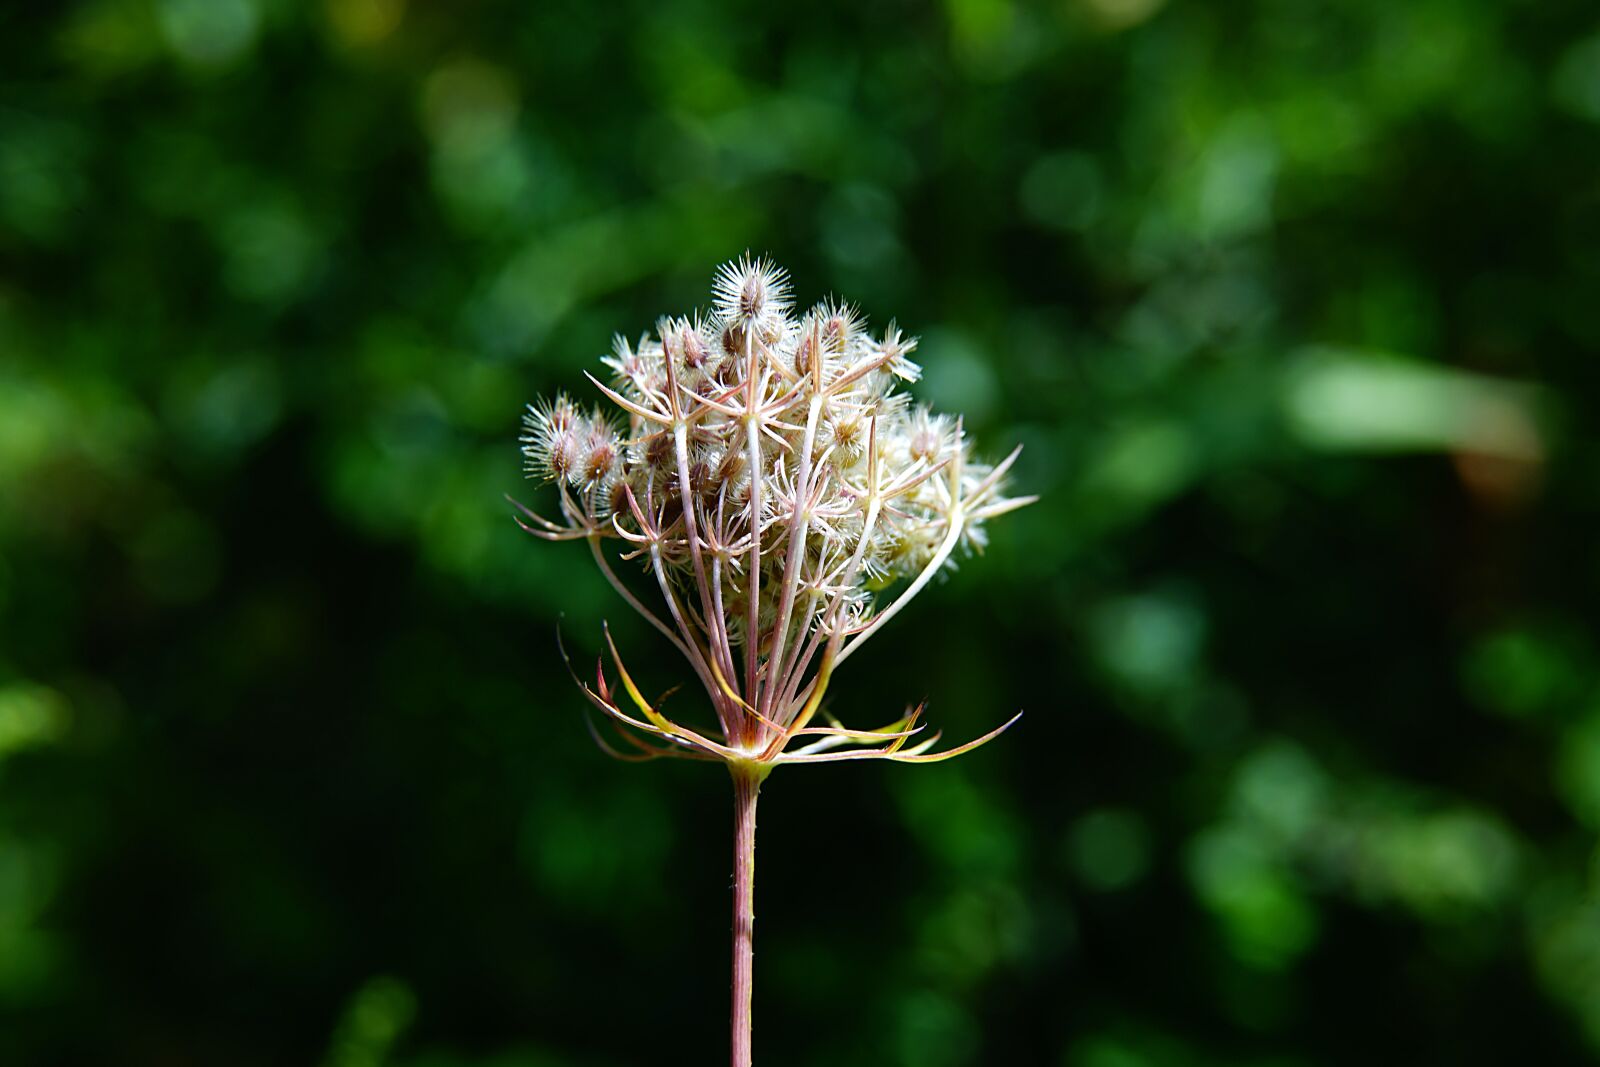 Sony a7 II sample photo. Wildflower, dry, withered photography